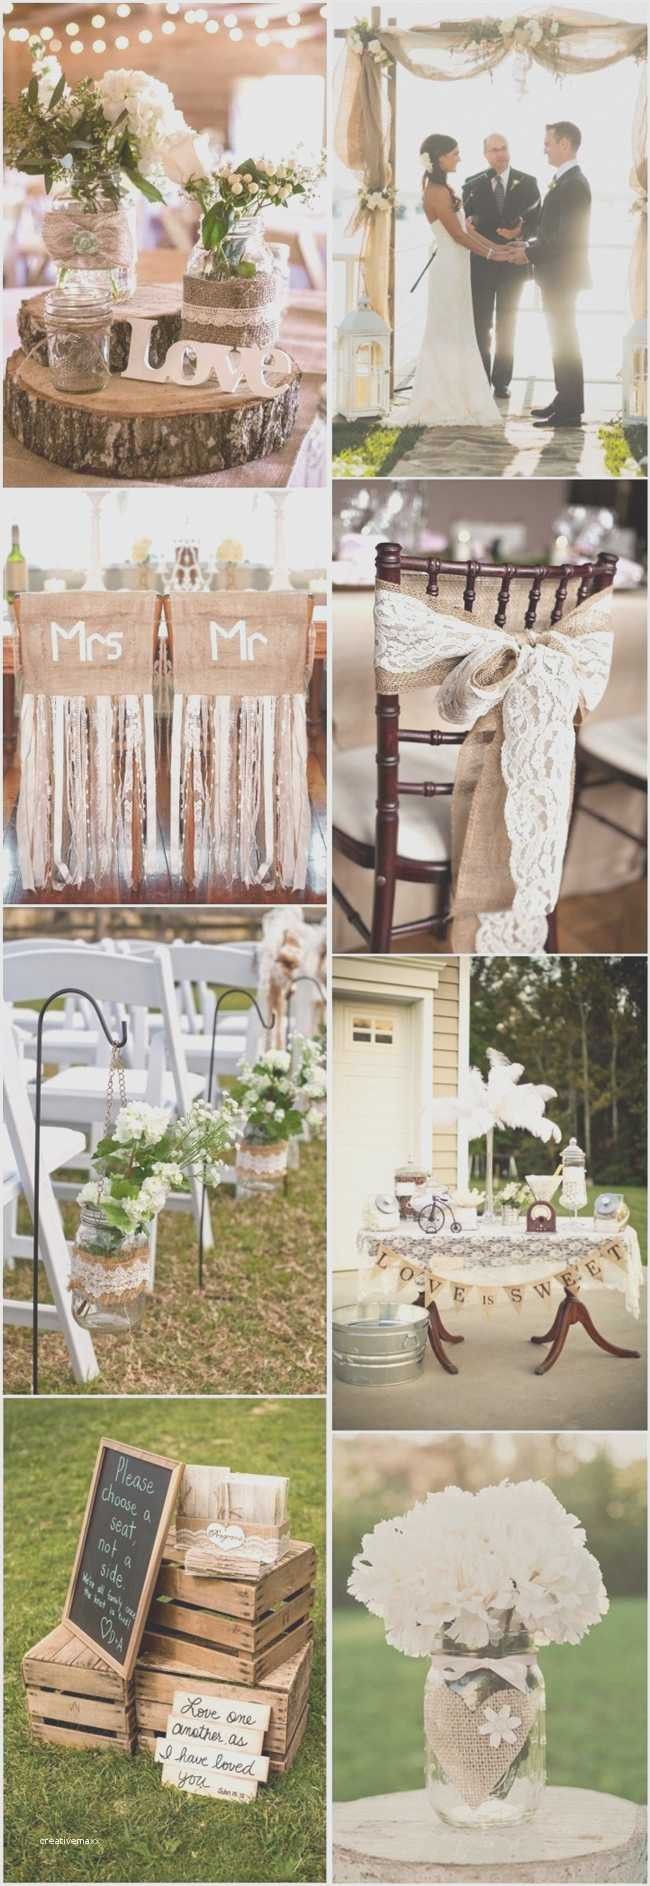 Wedding Decor For Sale
 Lovely Rustic Wedding Decorations for Sale Creative Maxx